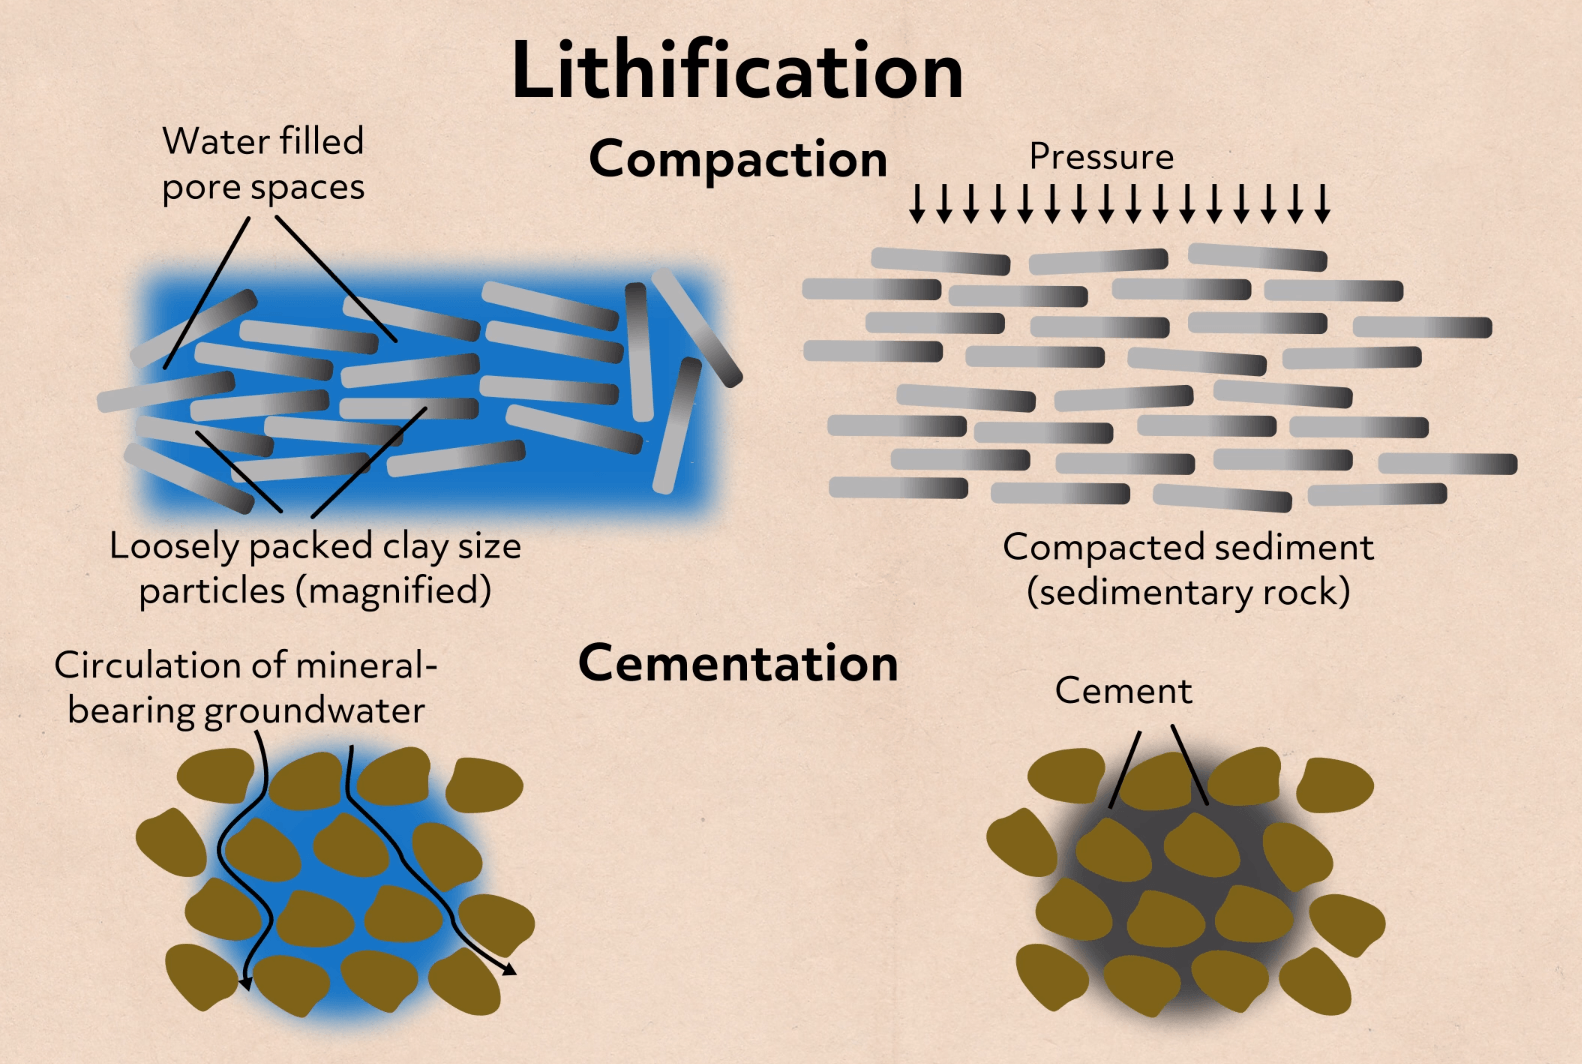 A diagram shows the processes of compaction and cementation